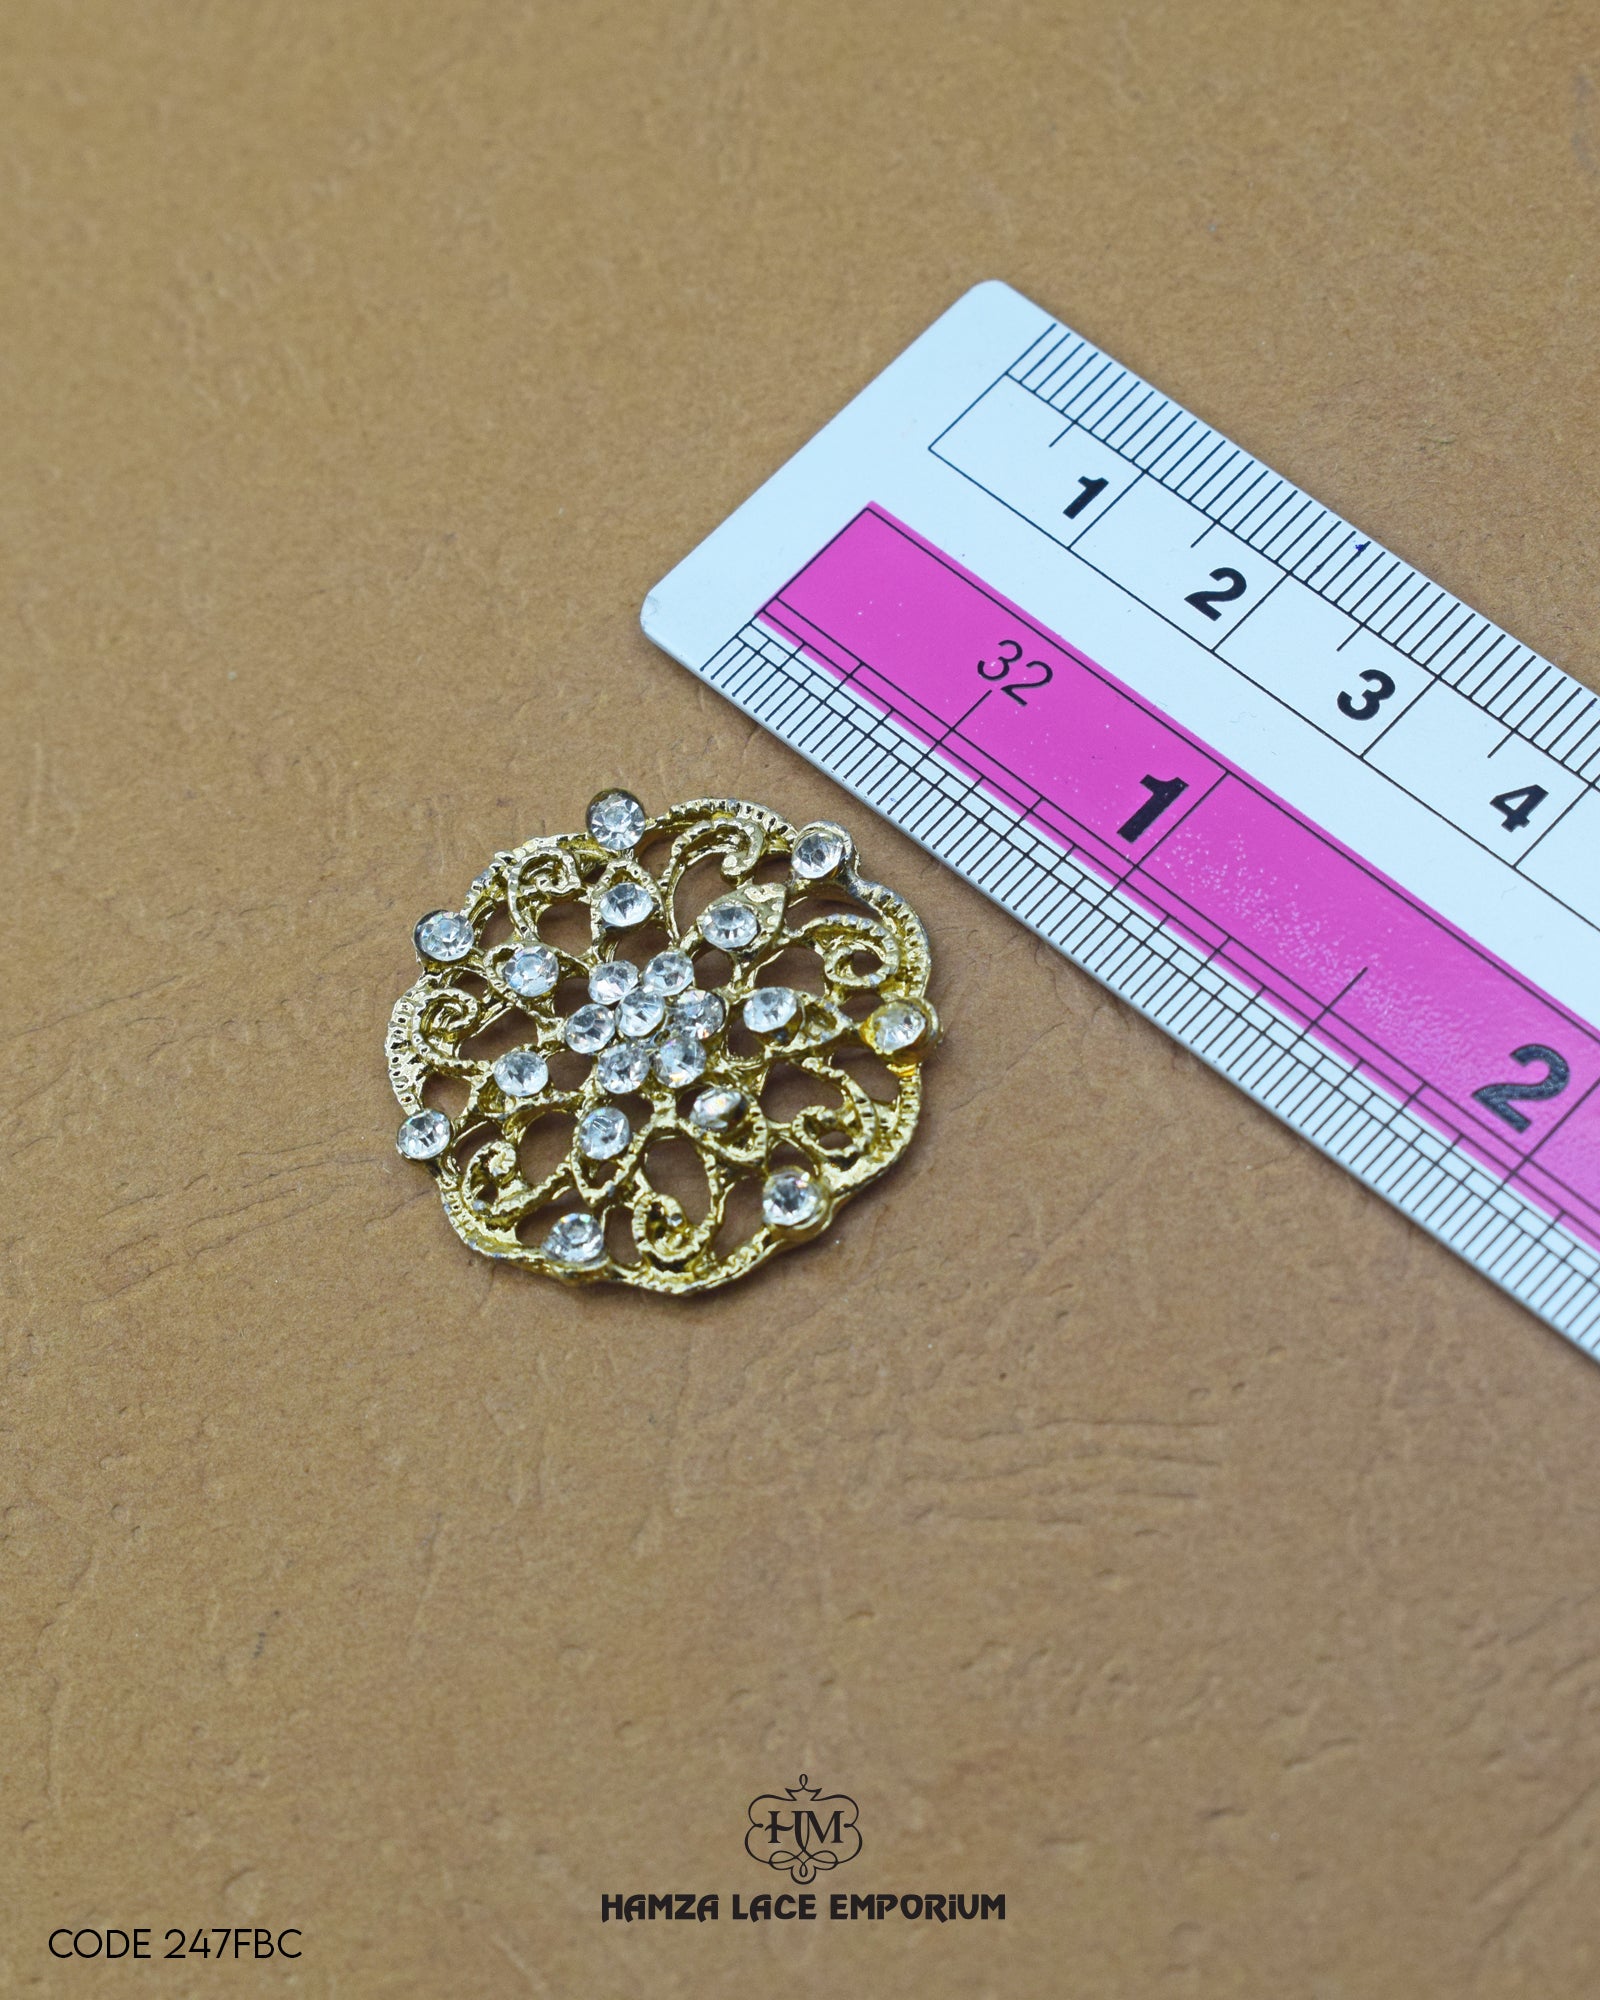 'Fancy Button 247FBC' with ruler for size reference in the product image.